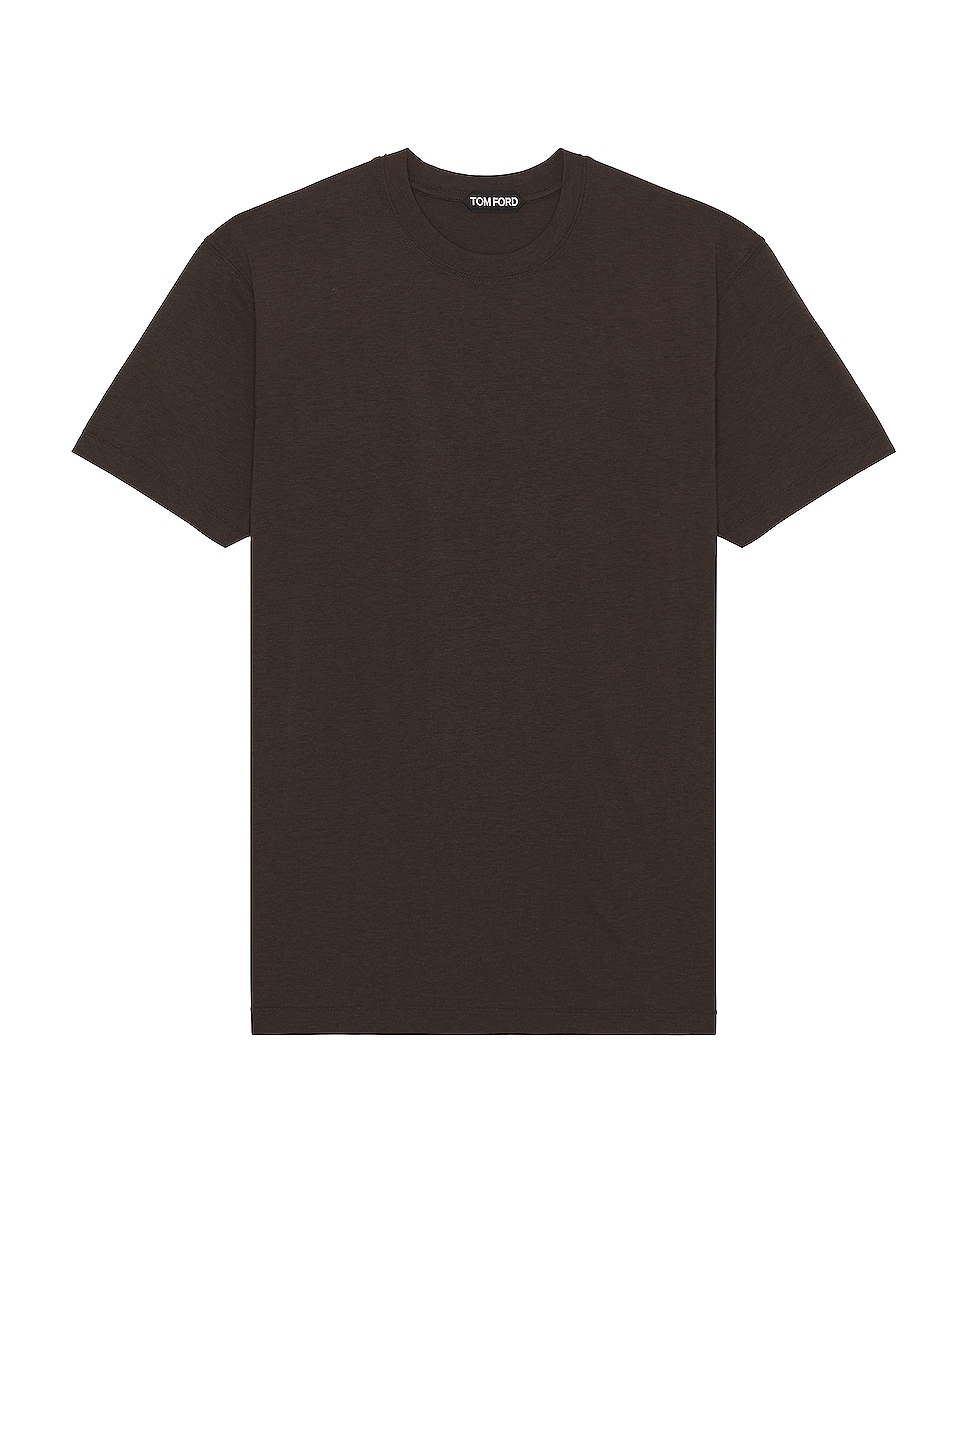 Image 1 of TOM FORD Lyocell Cotton Short Sleeve Tee in Dark Chocolate